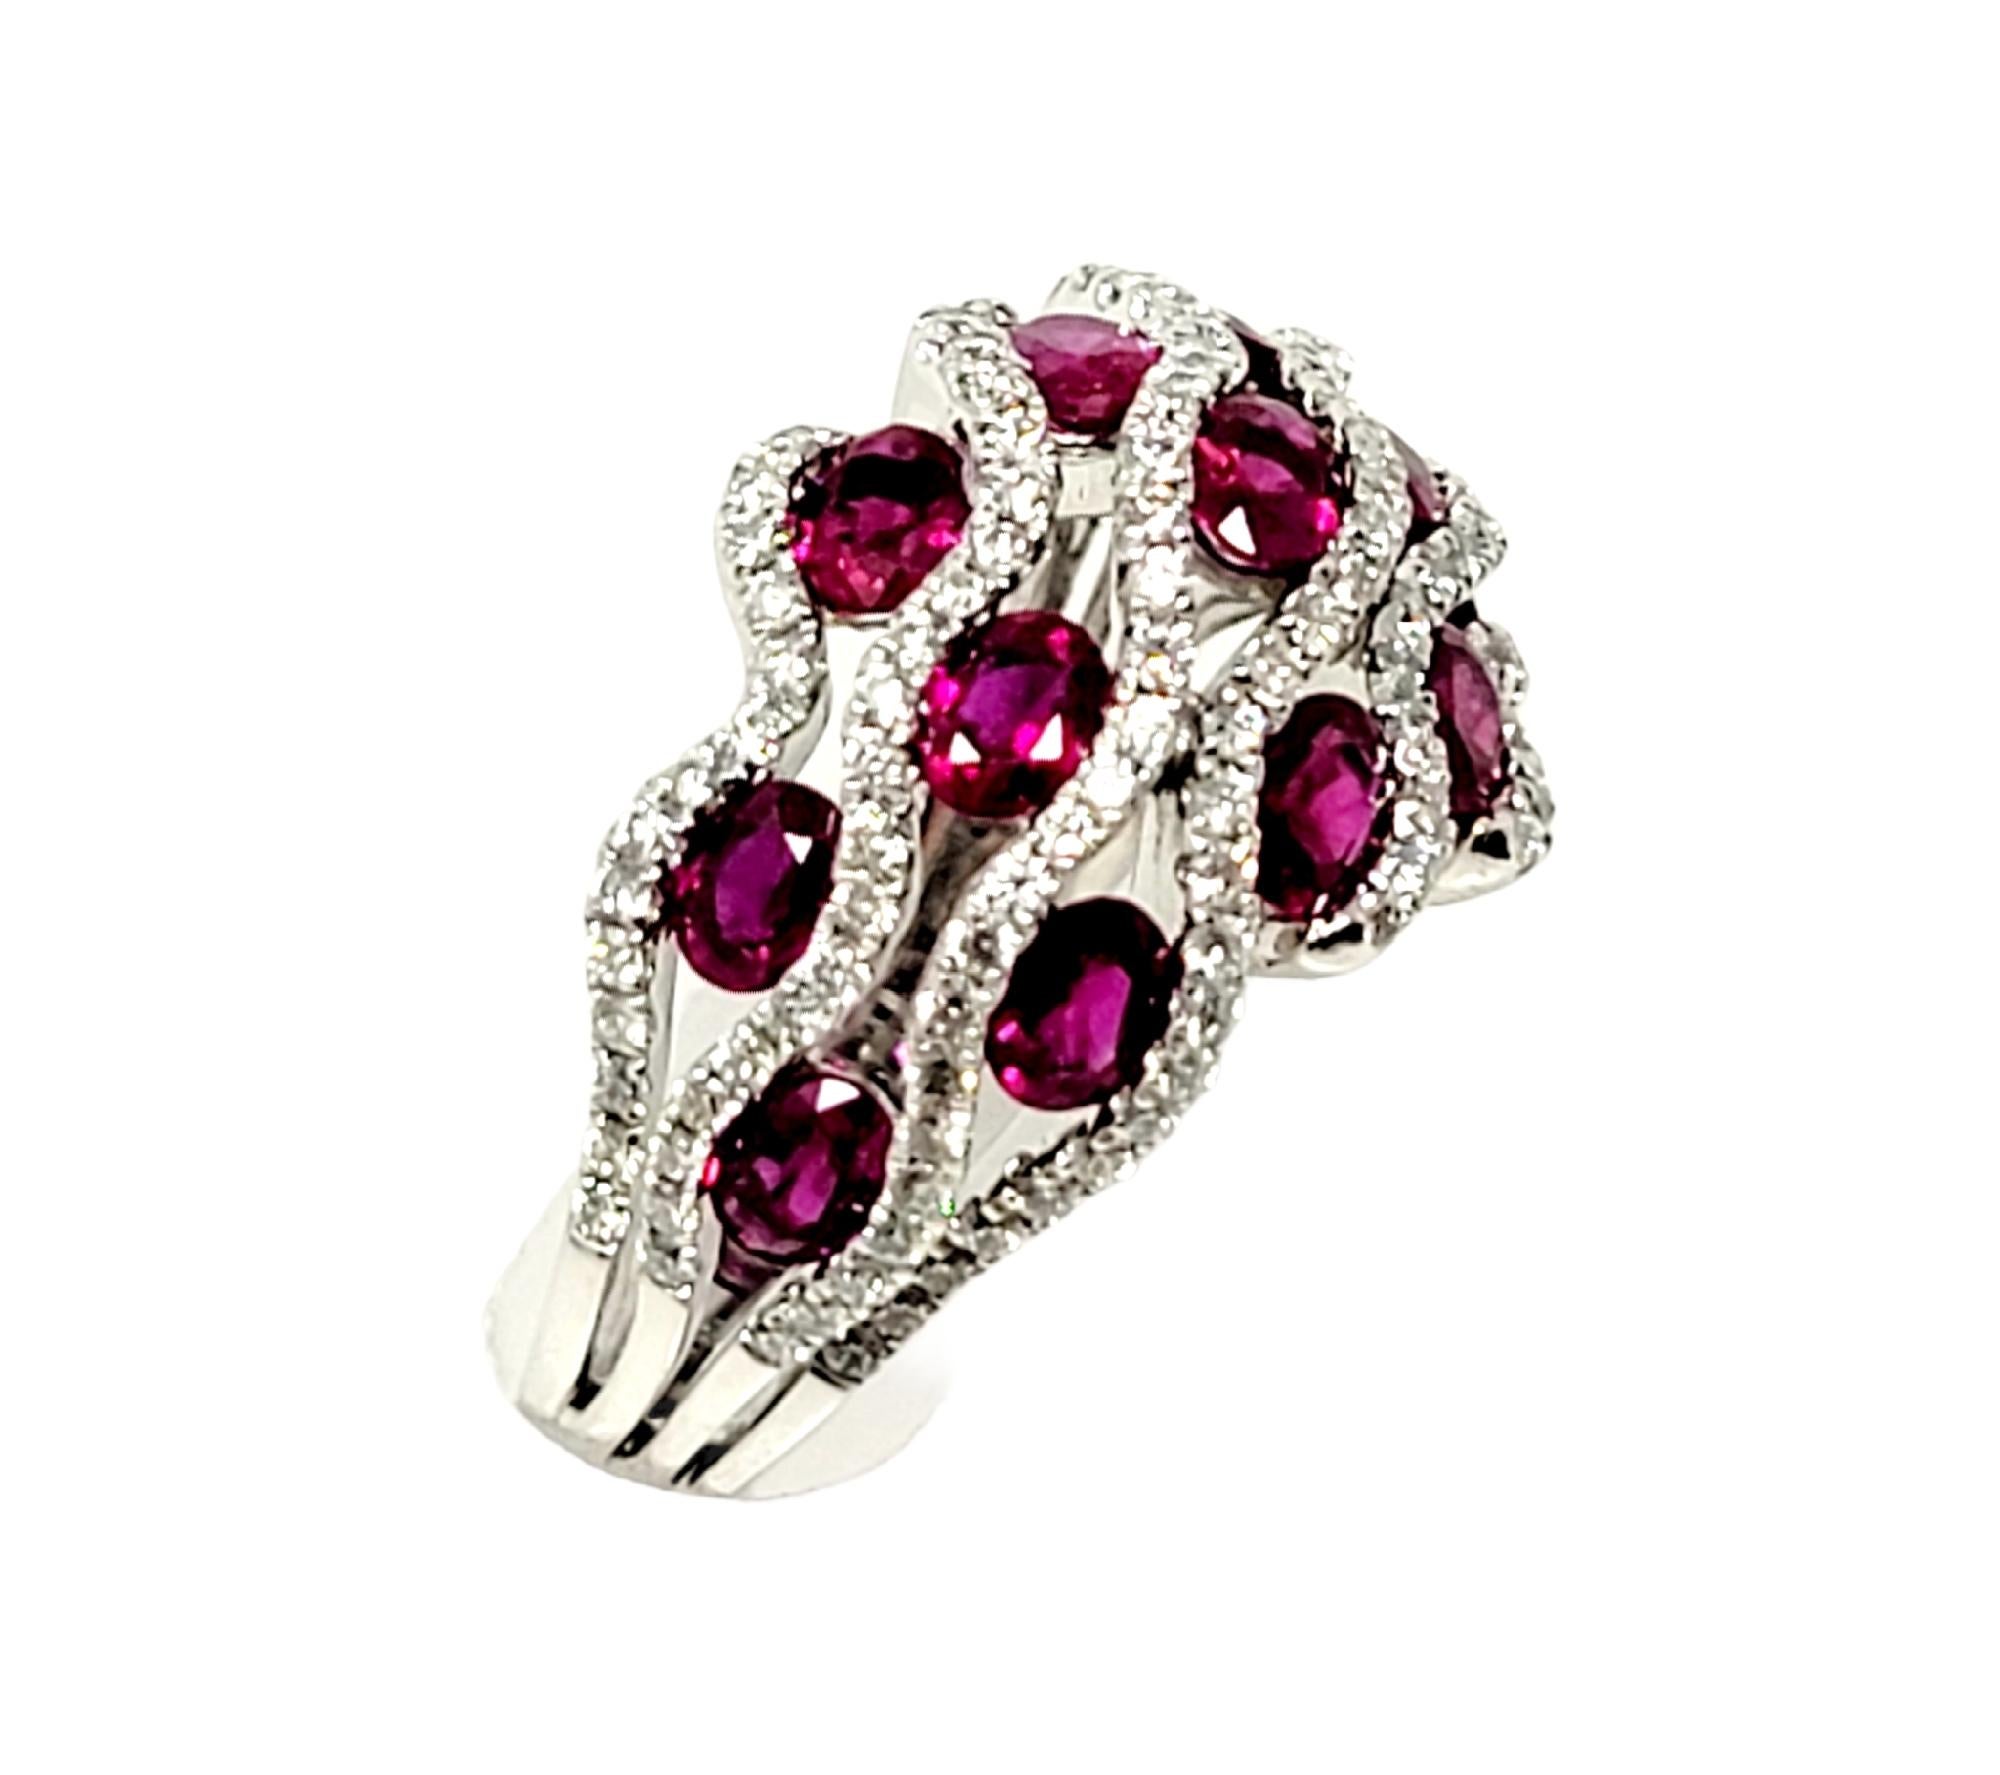 Ring size: 8

Breathtaking ruby & diamond cocktail ring bursting with vibrant color. This gorgeous piece absolutely dazzles with its rich red rubies and bright white diamonds. The curved dome shape paired with the wavy design creates a flattering,